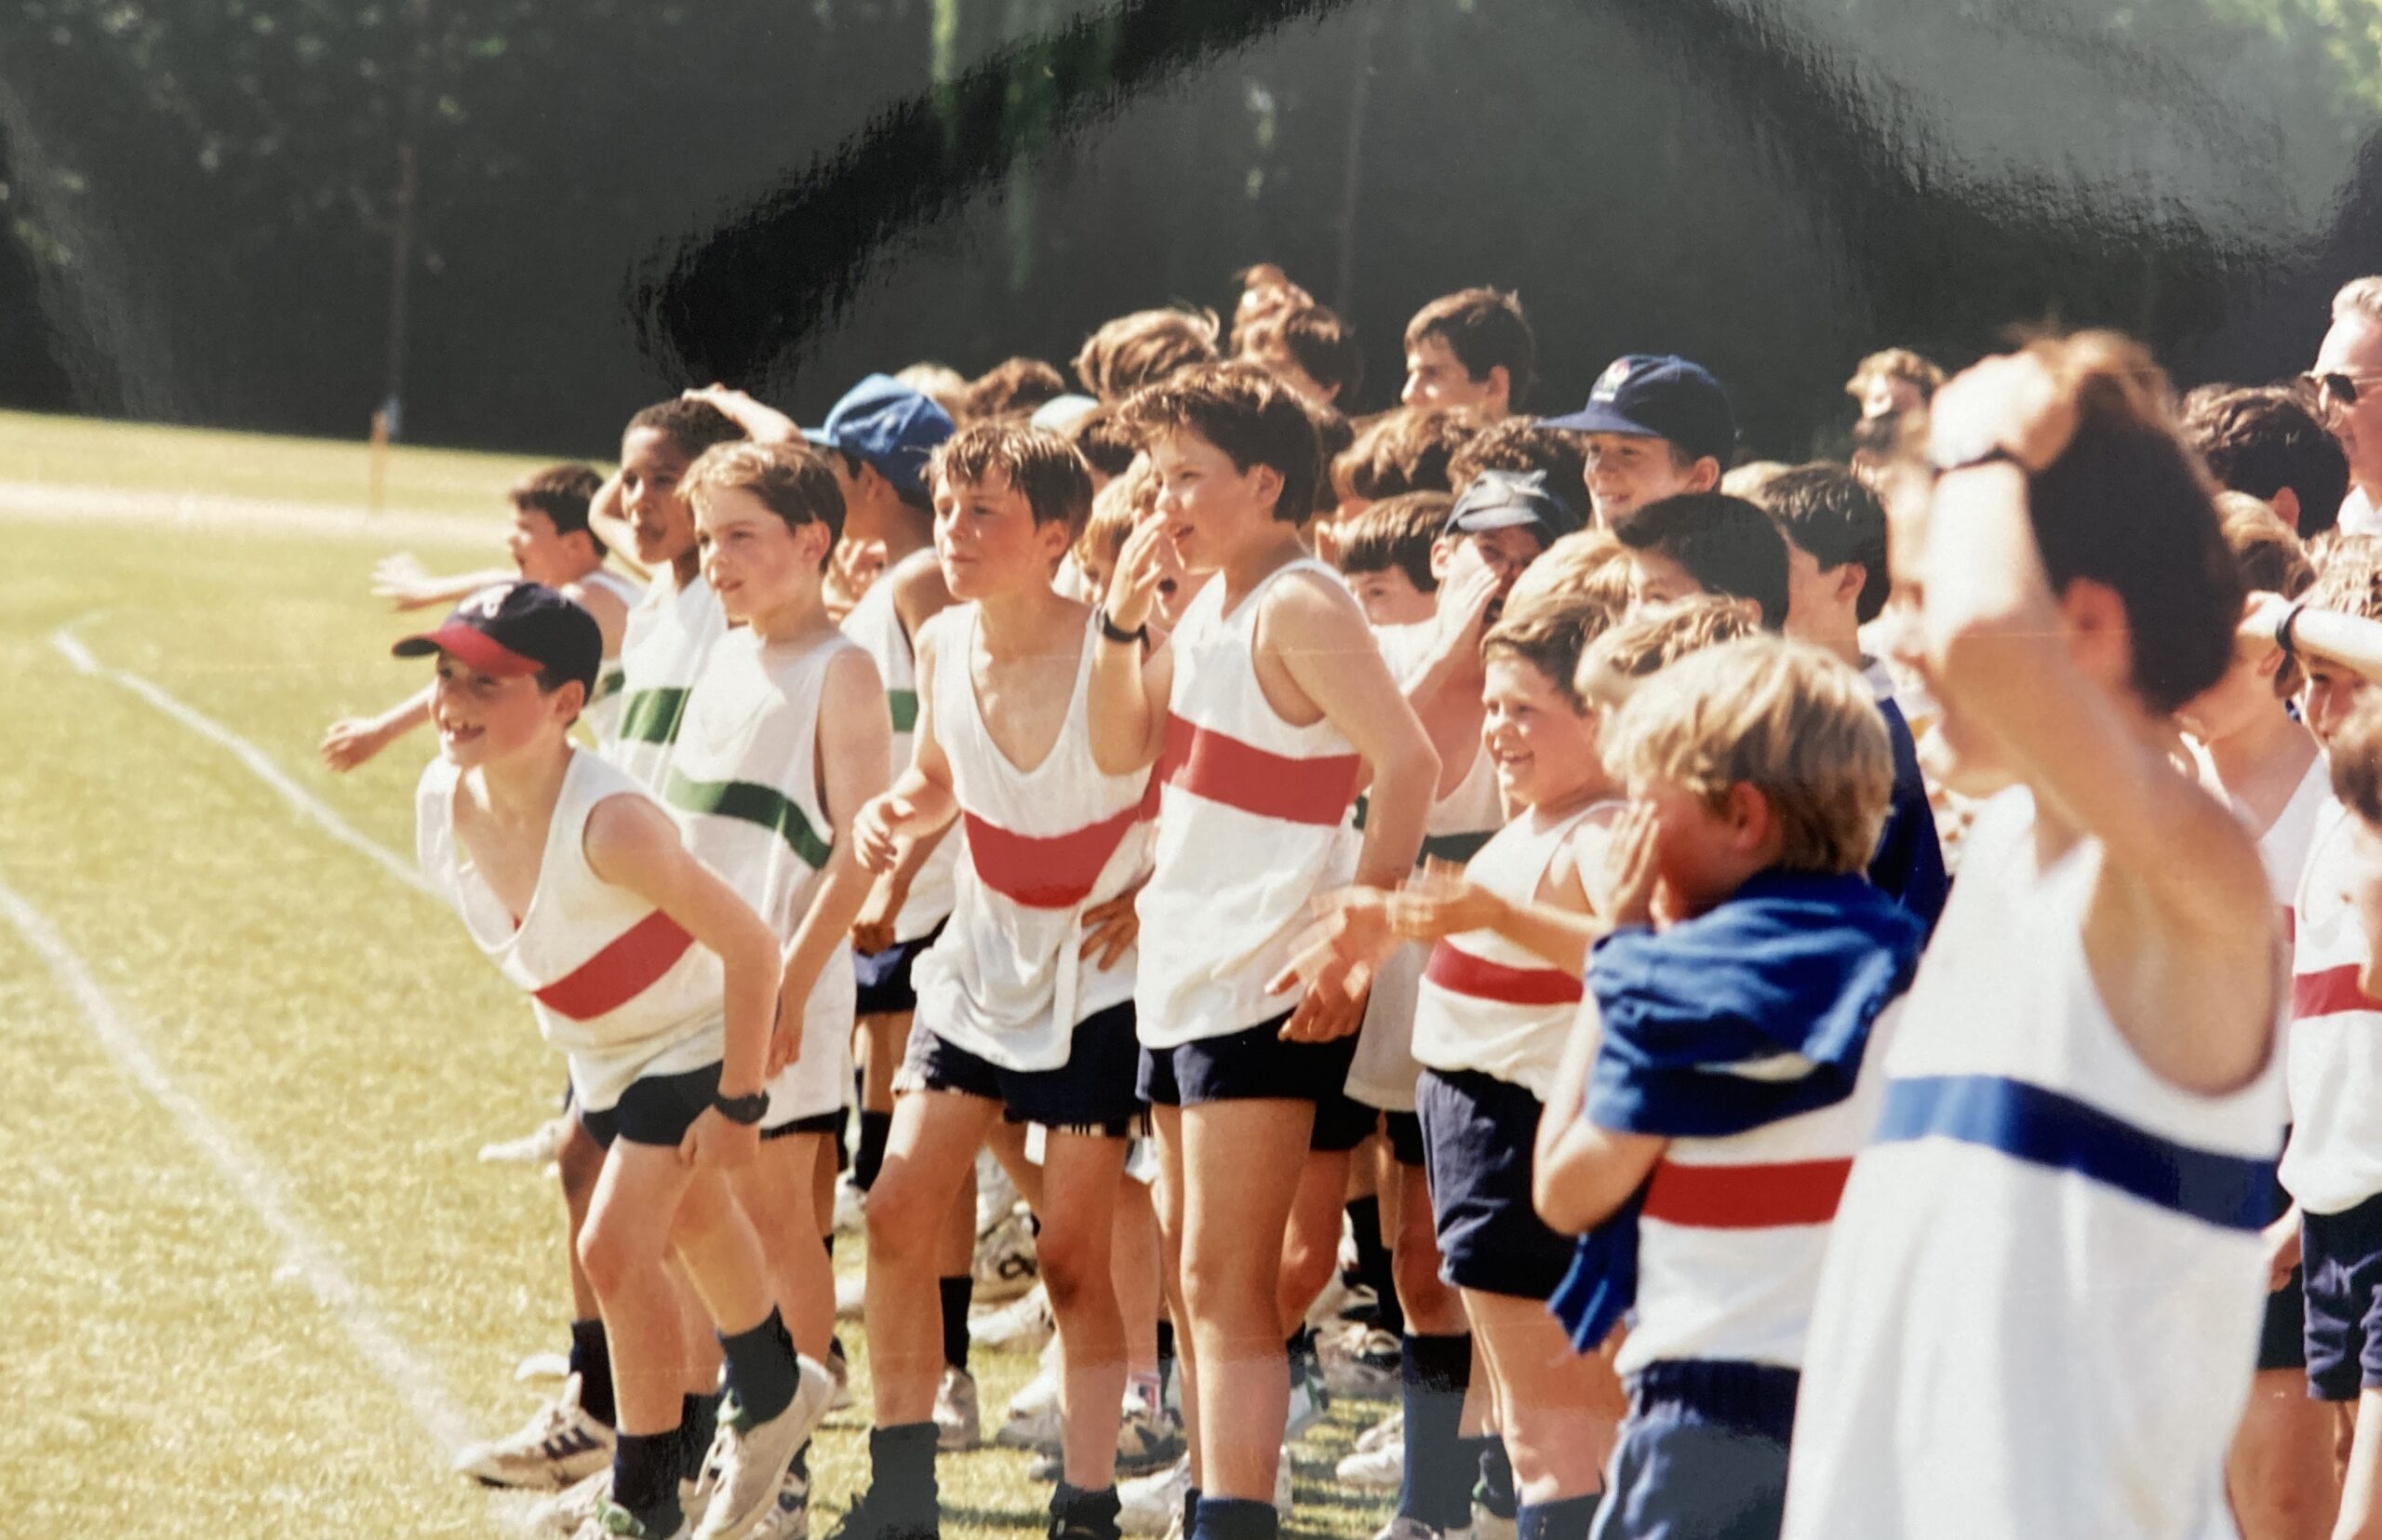 An old photo at Sports Day.